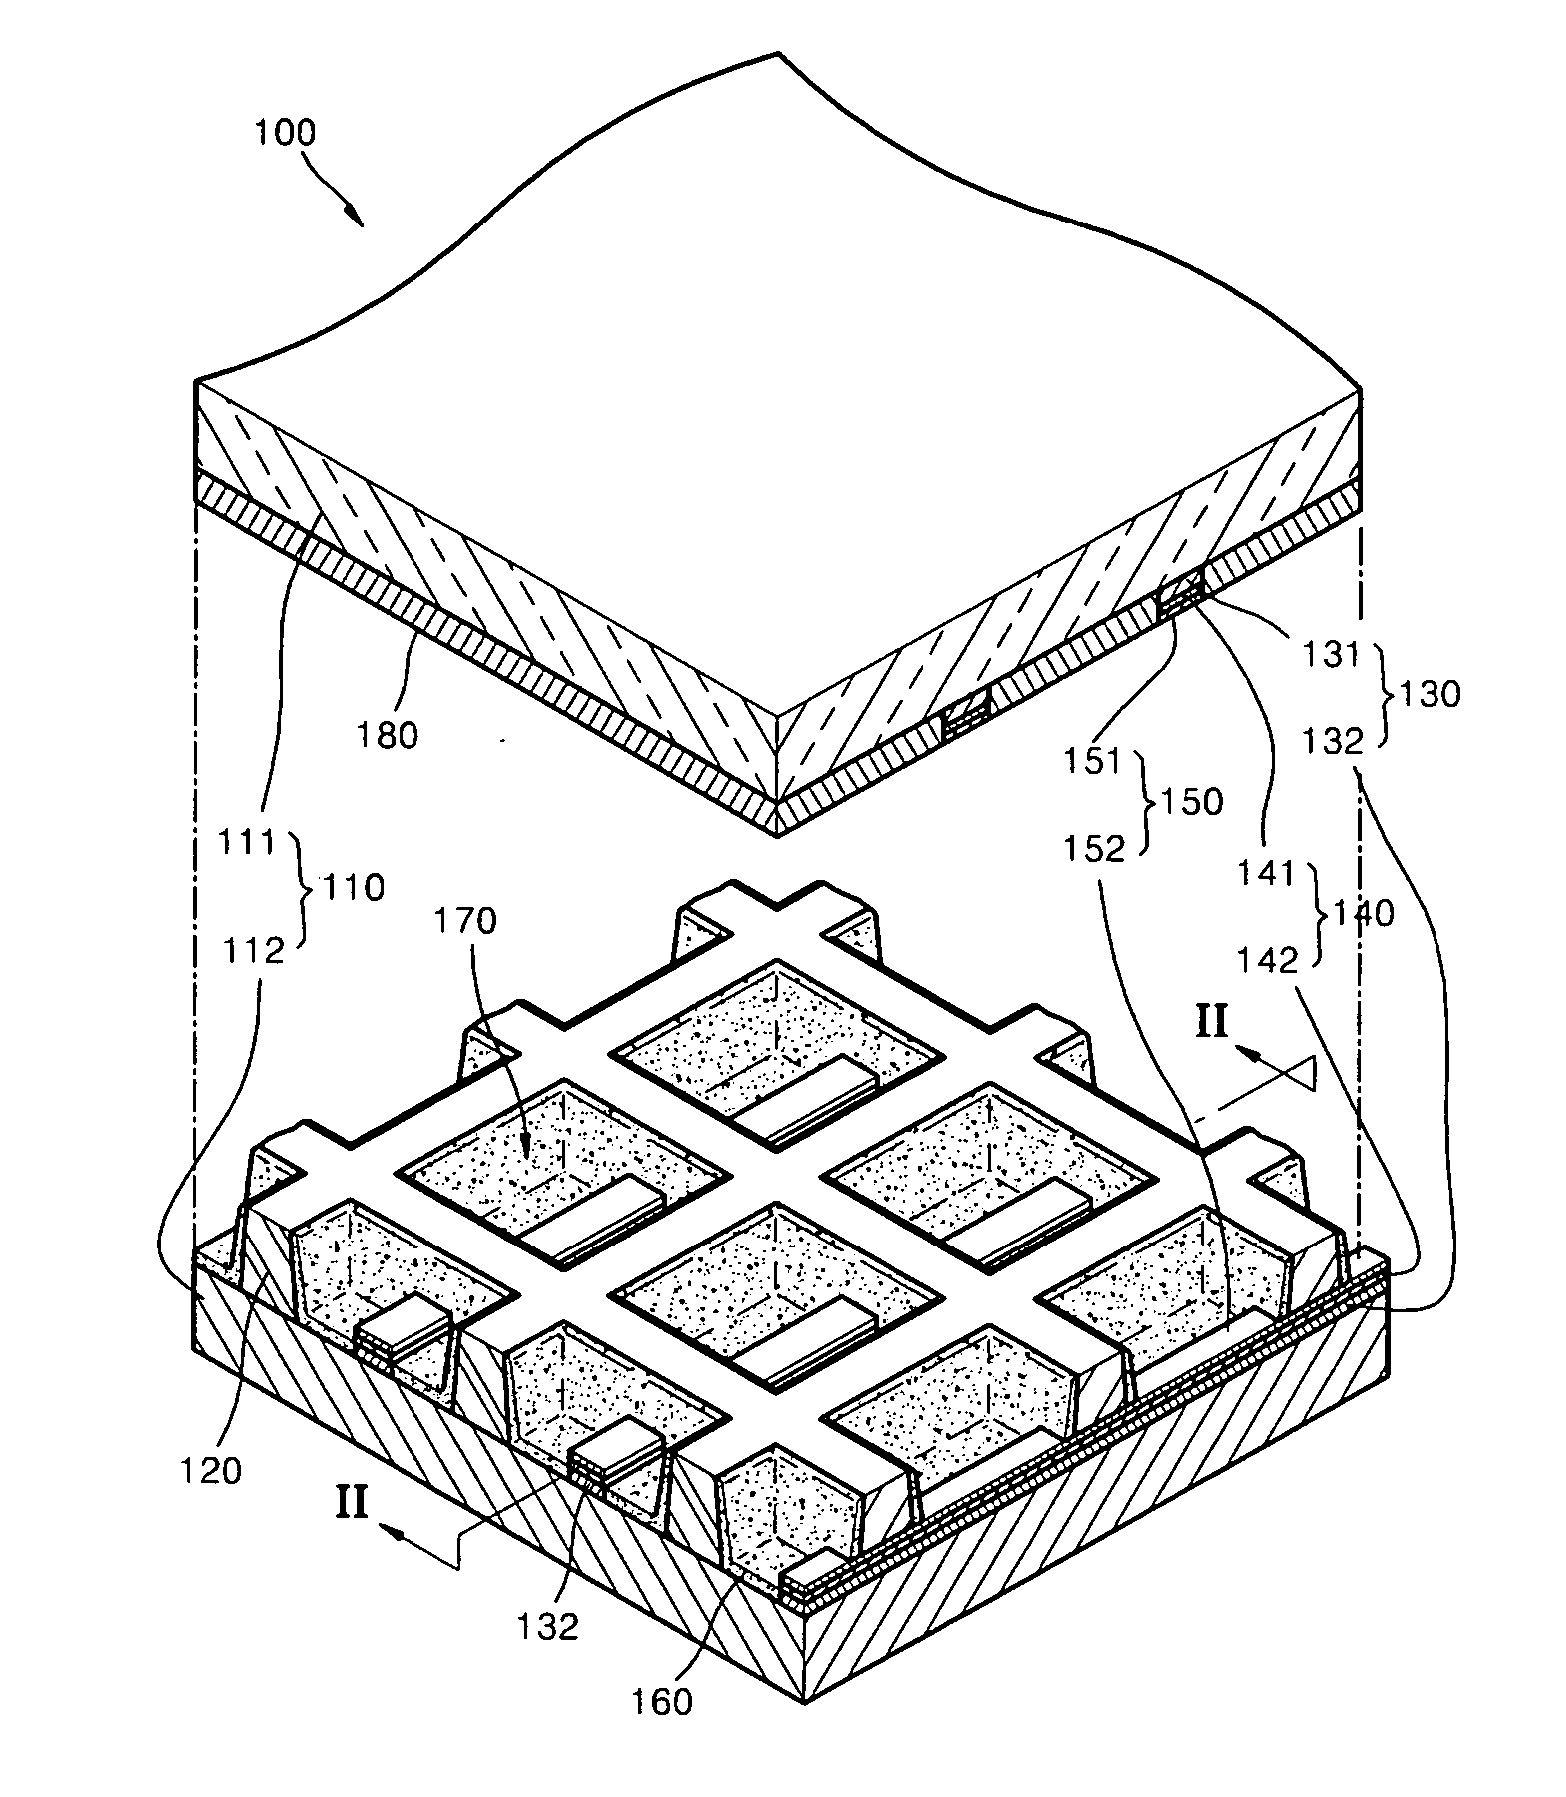 Direct current plasma panel (DC-PDP) and method of manufacturing the same